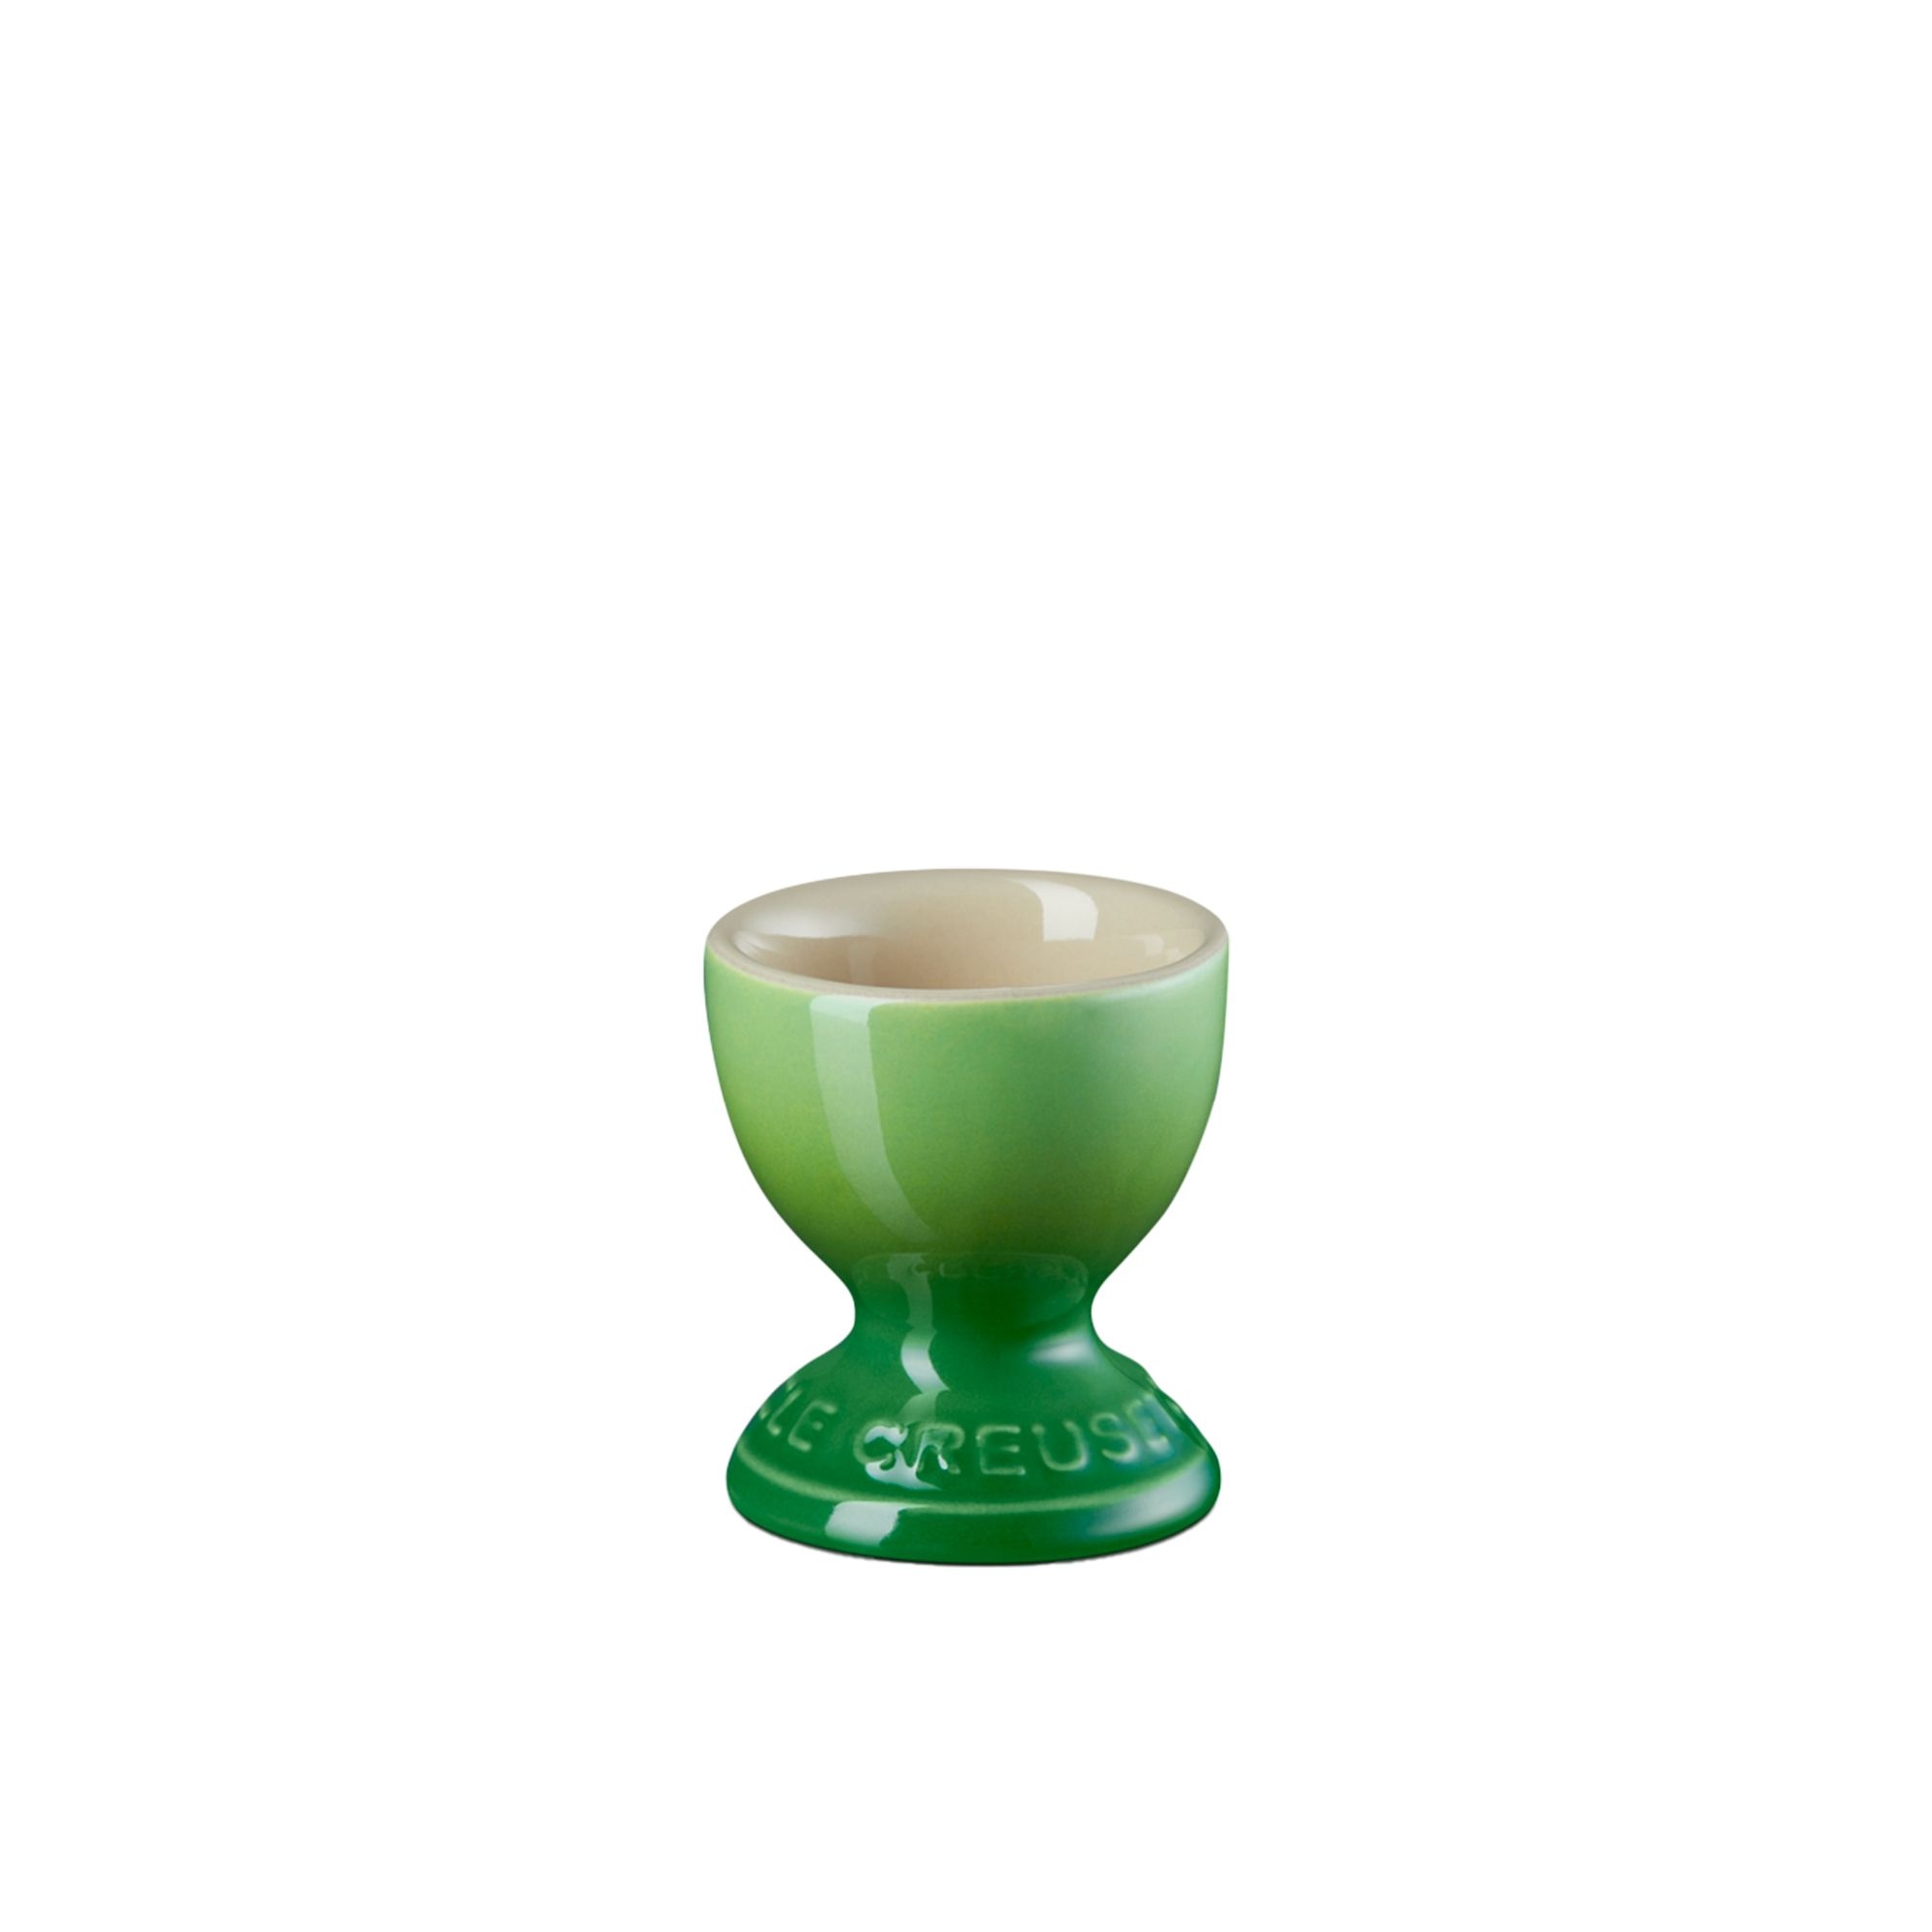 Le Creuset Stoneware Egg Cup Bamboo Green Image 1